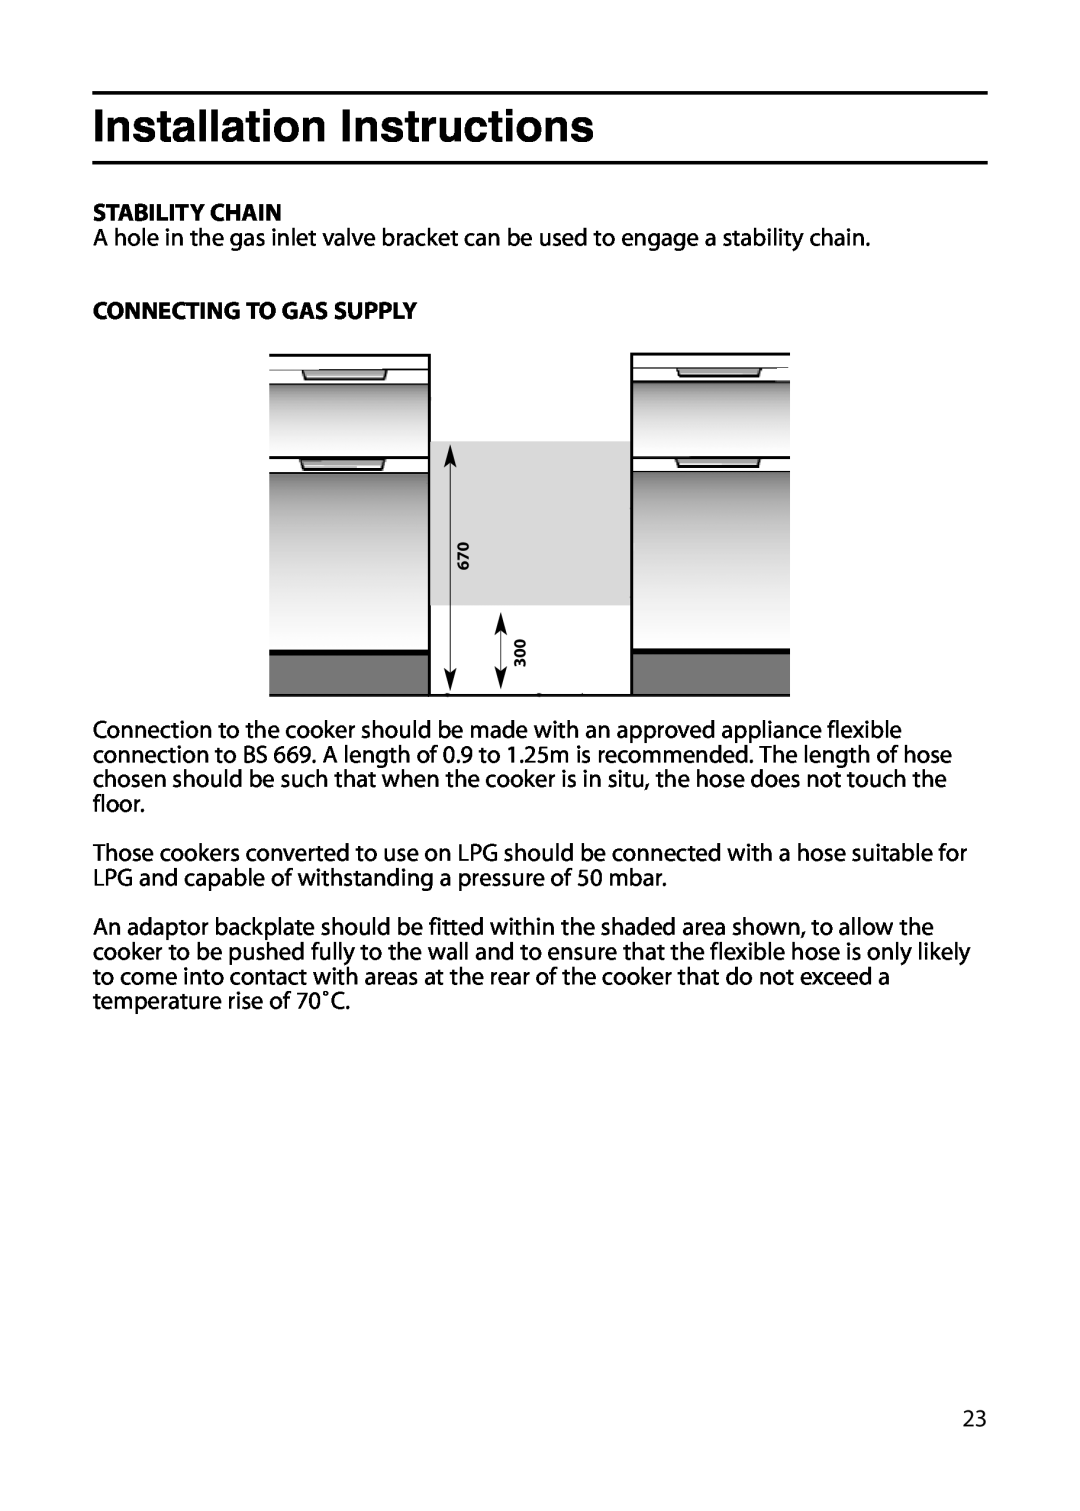 Indesit KT6G2W, KT6G2M manual Stability Chain, Connecting To Gas Supply, Installation Instructions 